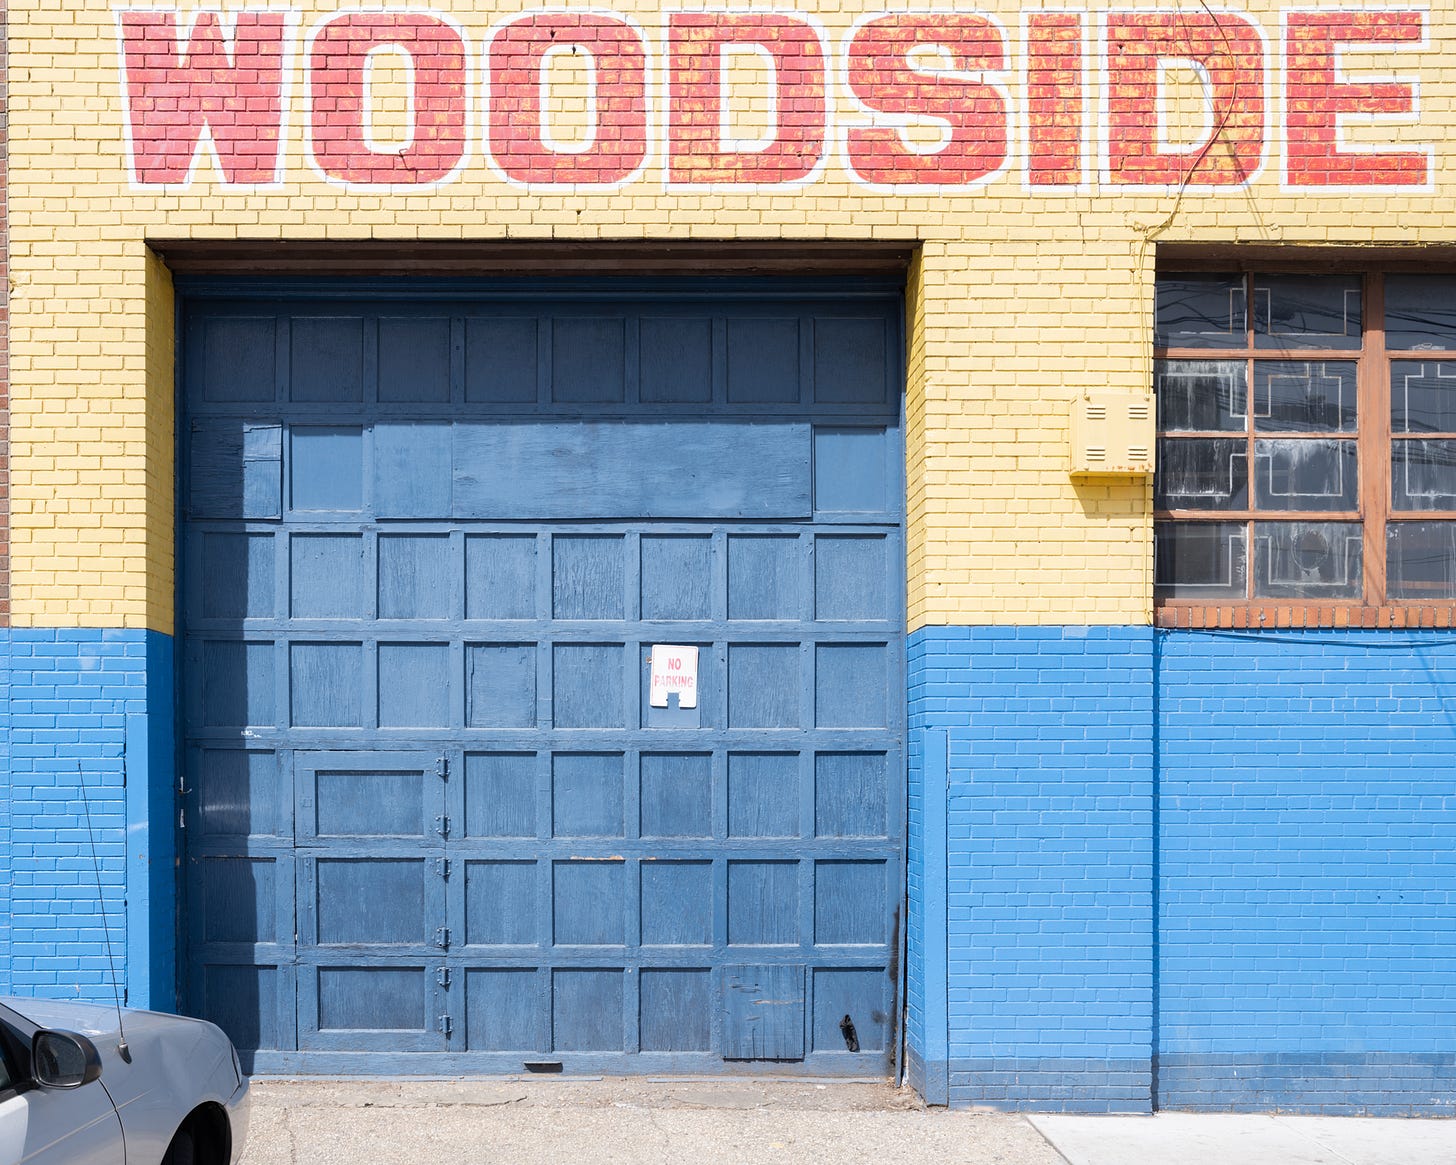 WOODSIDE written in big red block letters on yellow wall over blue painted garage door